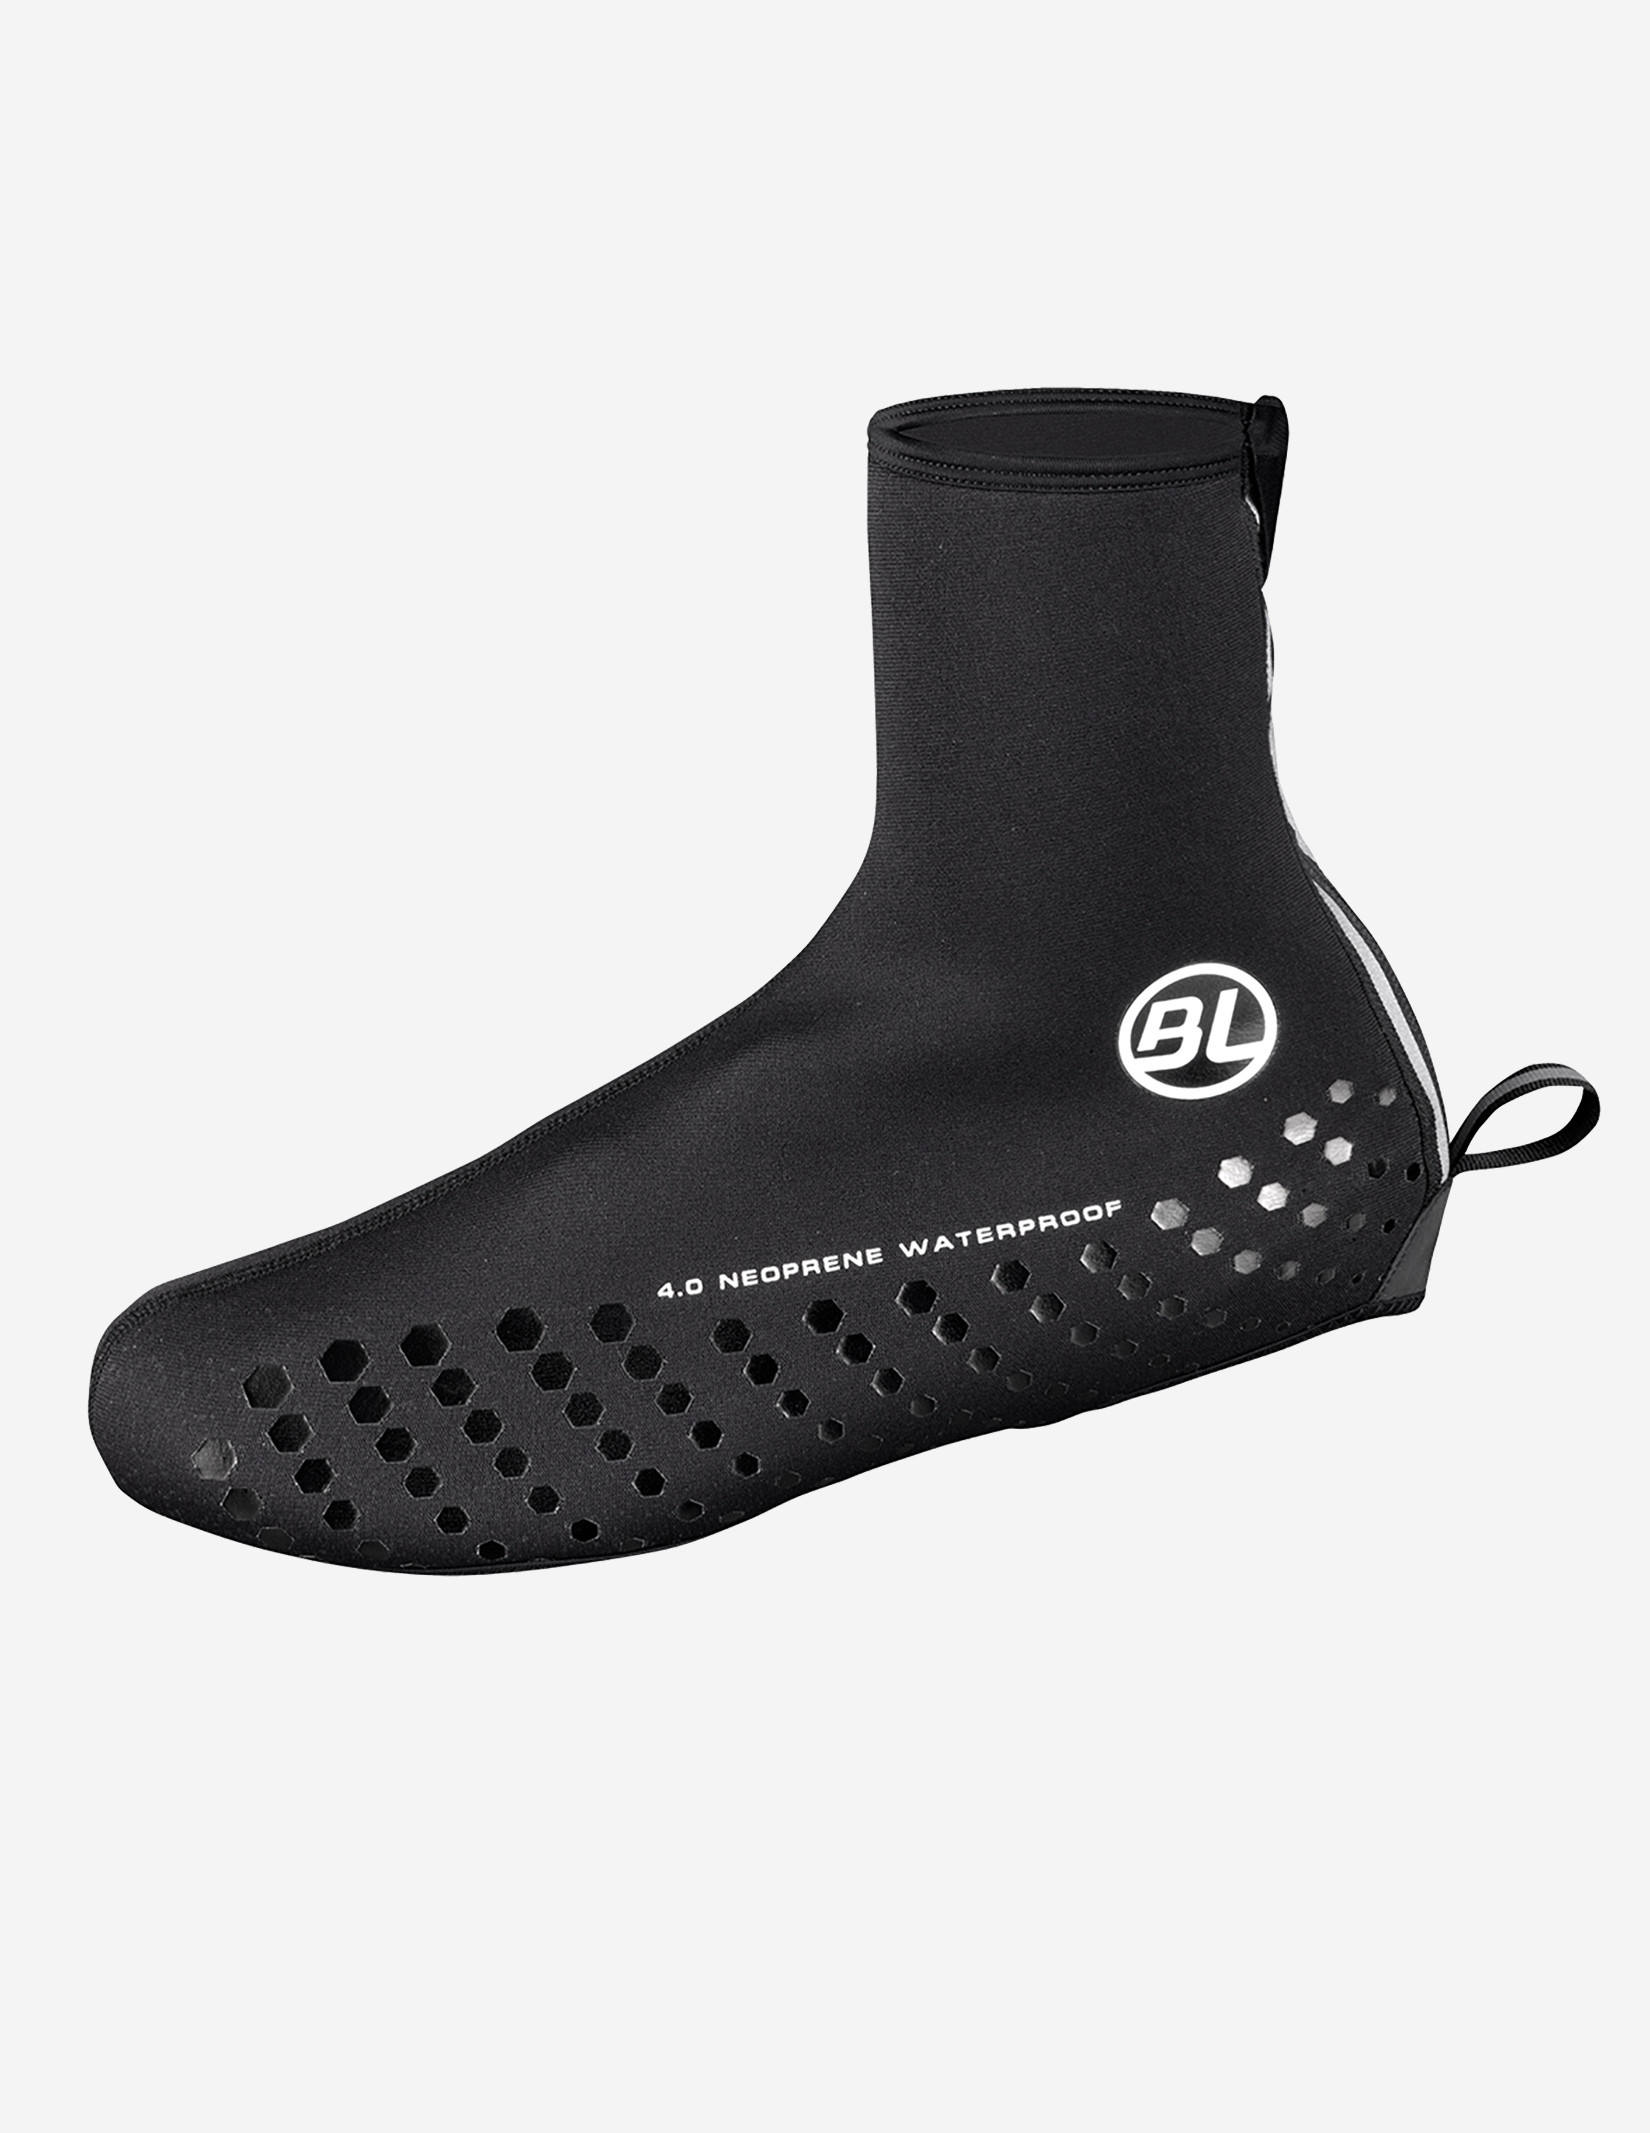 POC Thermal - Couvre chaussure vélo - Mathieu